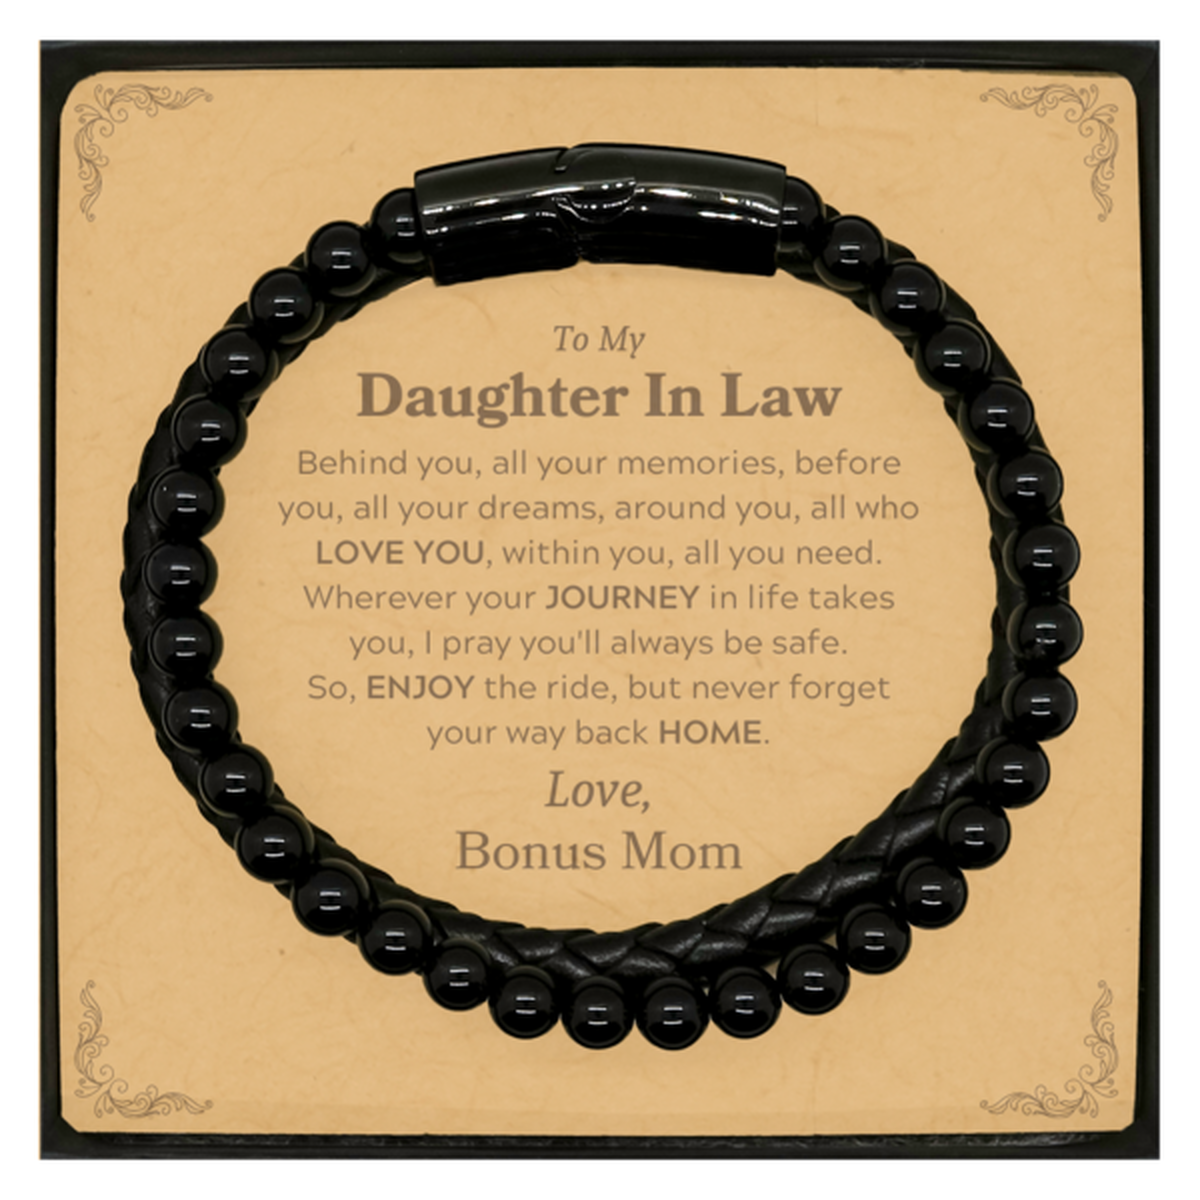 To My Daughter In Law Graduation Gifts from Bonus Mom, Daughter In Law Stone Leather Bracelets Christmas Birthday Gifts for Daughter In Law Behind you, all your memories, before you, all your dreams. Love, Bonus Mom